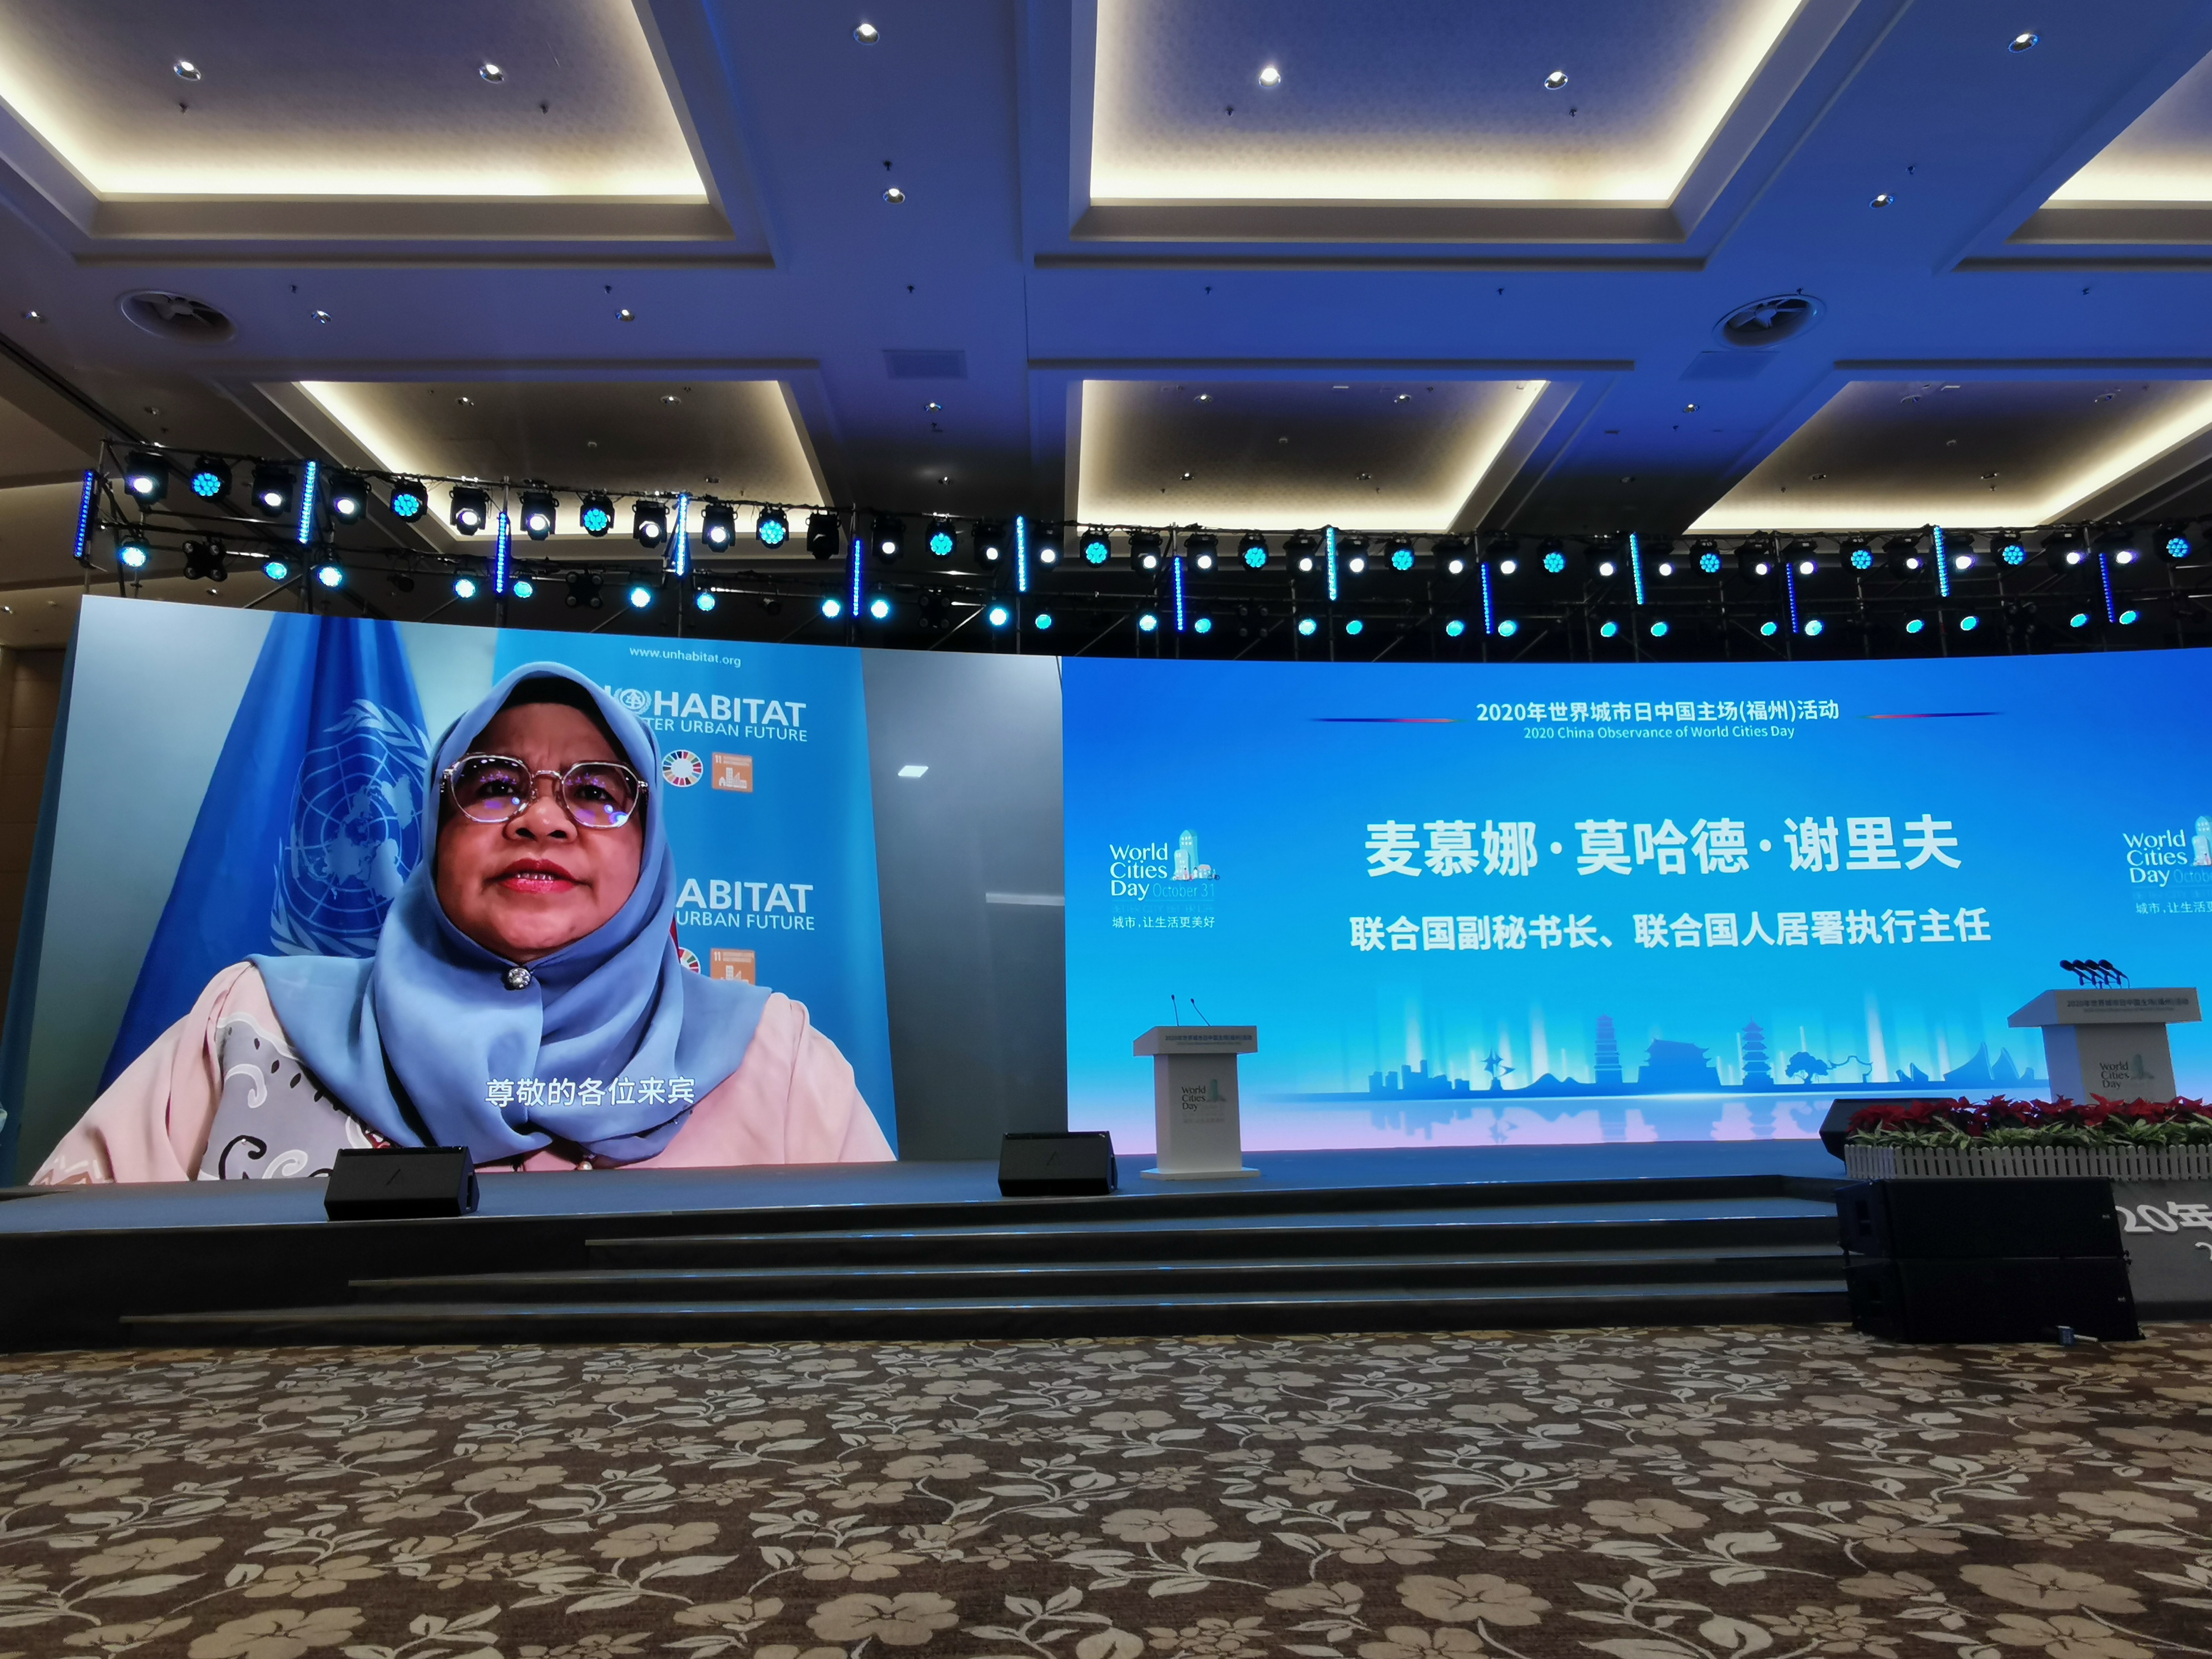 Ms. Maimunah Mohd Sharif, Executive Director of UN-Habitat, delivering a video message to the World Cities Day Observance in China